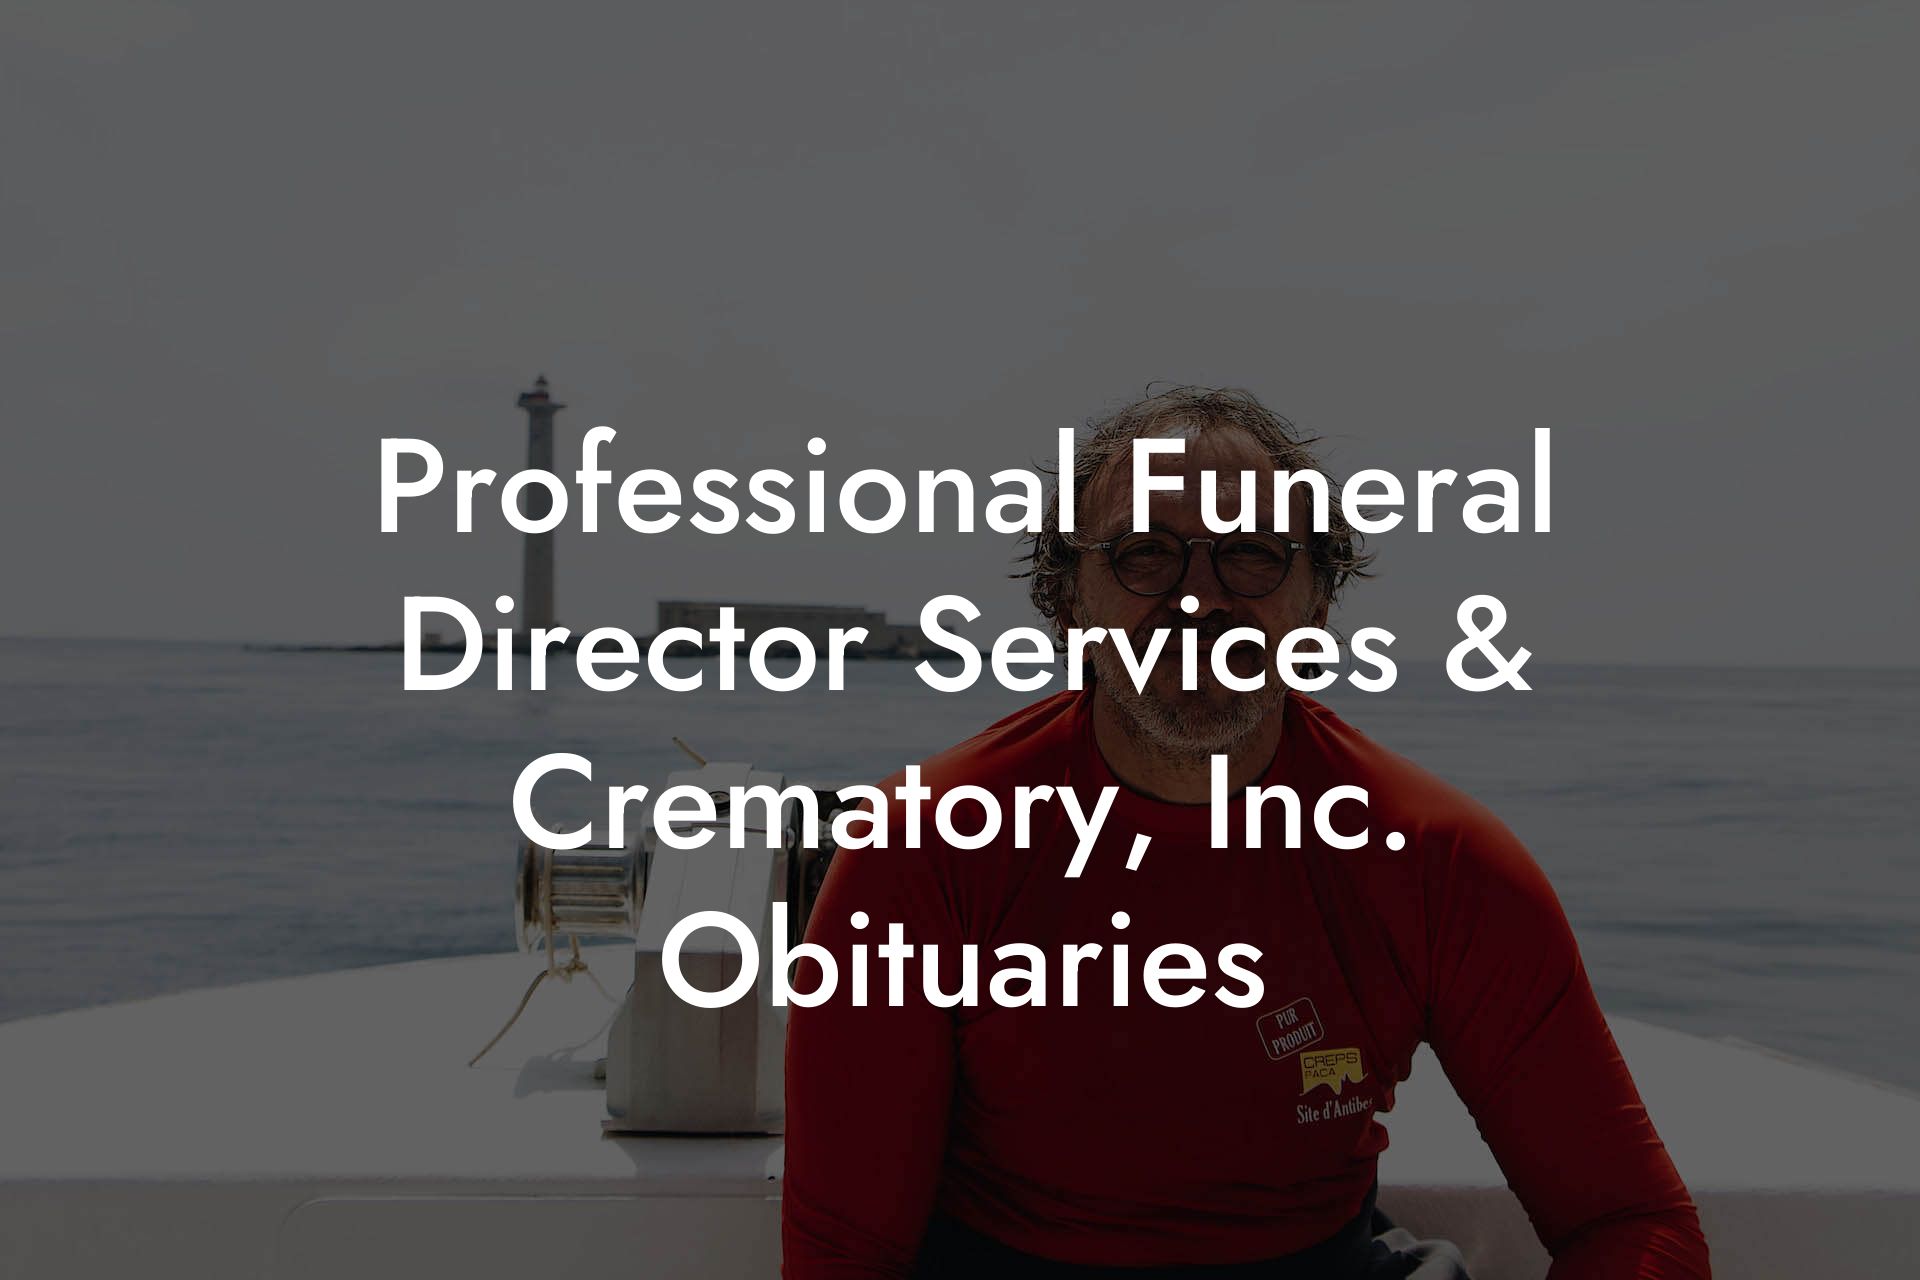 Professional Funeral Director Services & Crematory, Inc. Obituaries